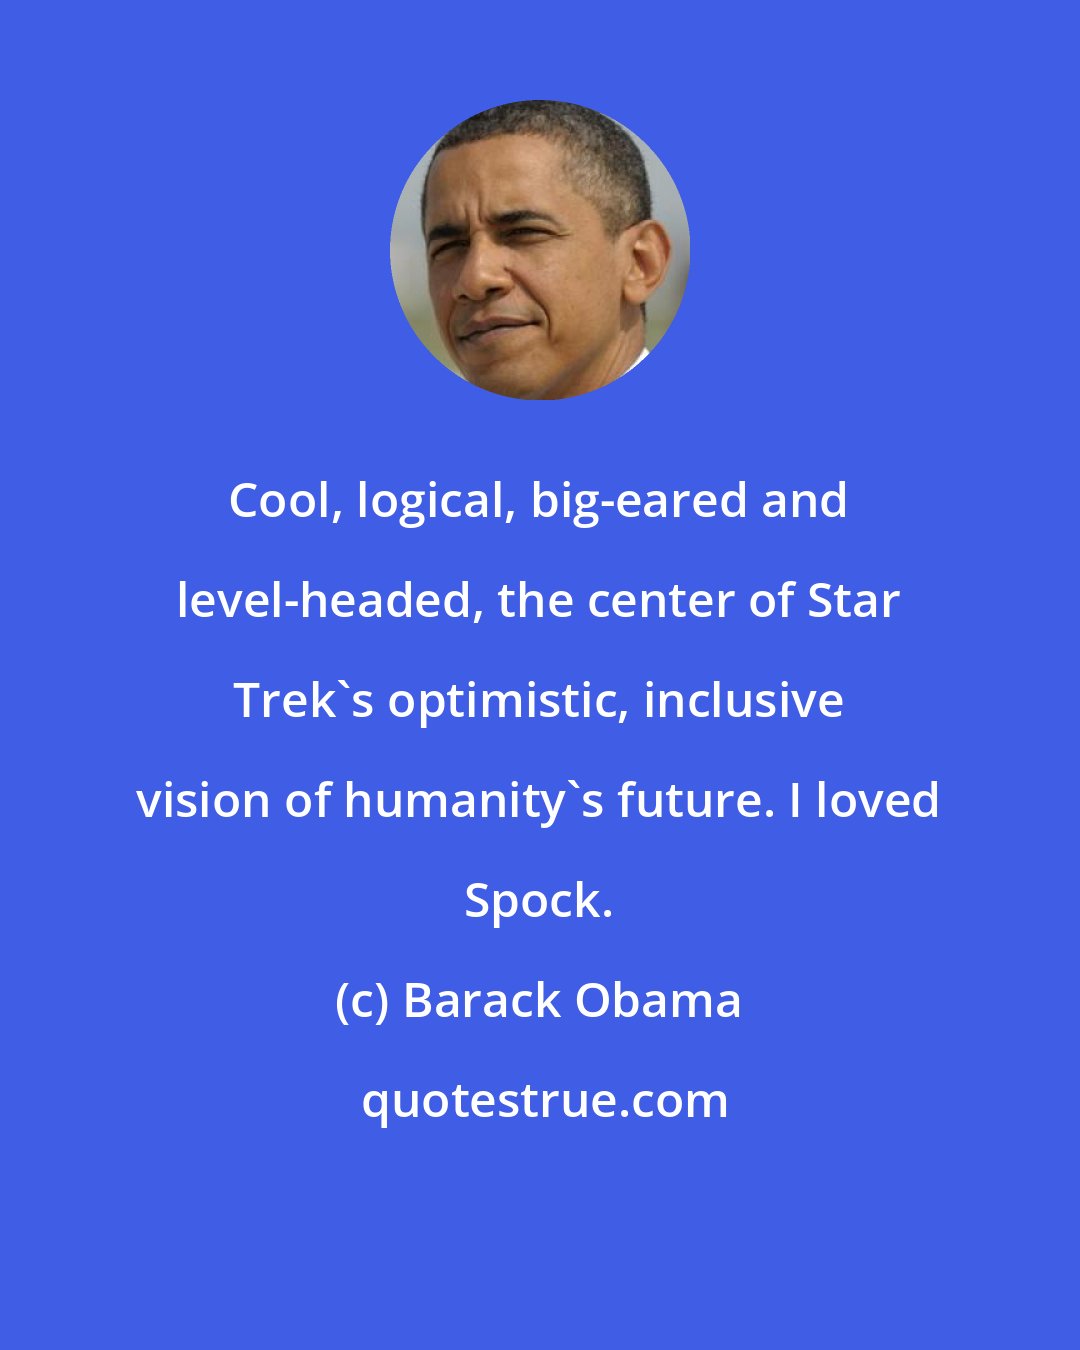 Barack Obama: Cool, logical, big-eared and level-headed, the center of Star Trek's optimistic, inclusive vision of humanity's future. I loved Spock.